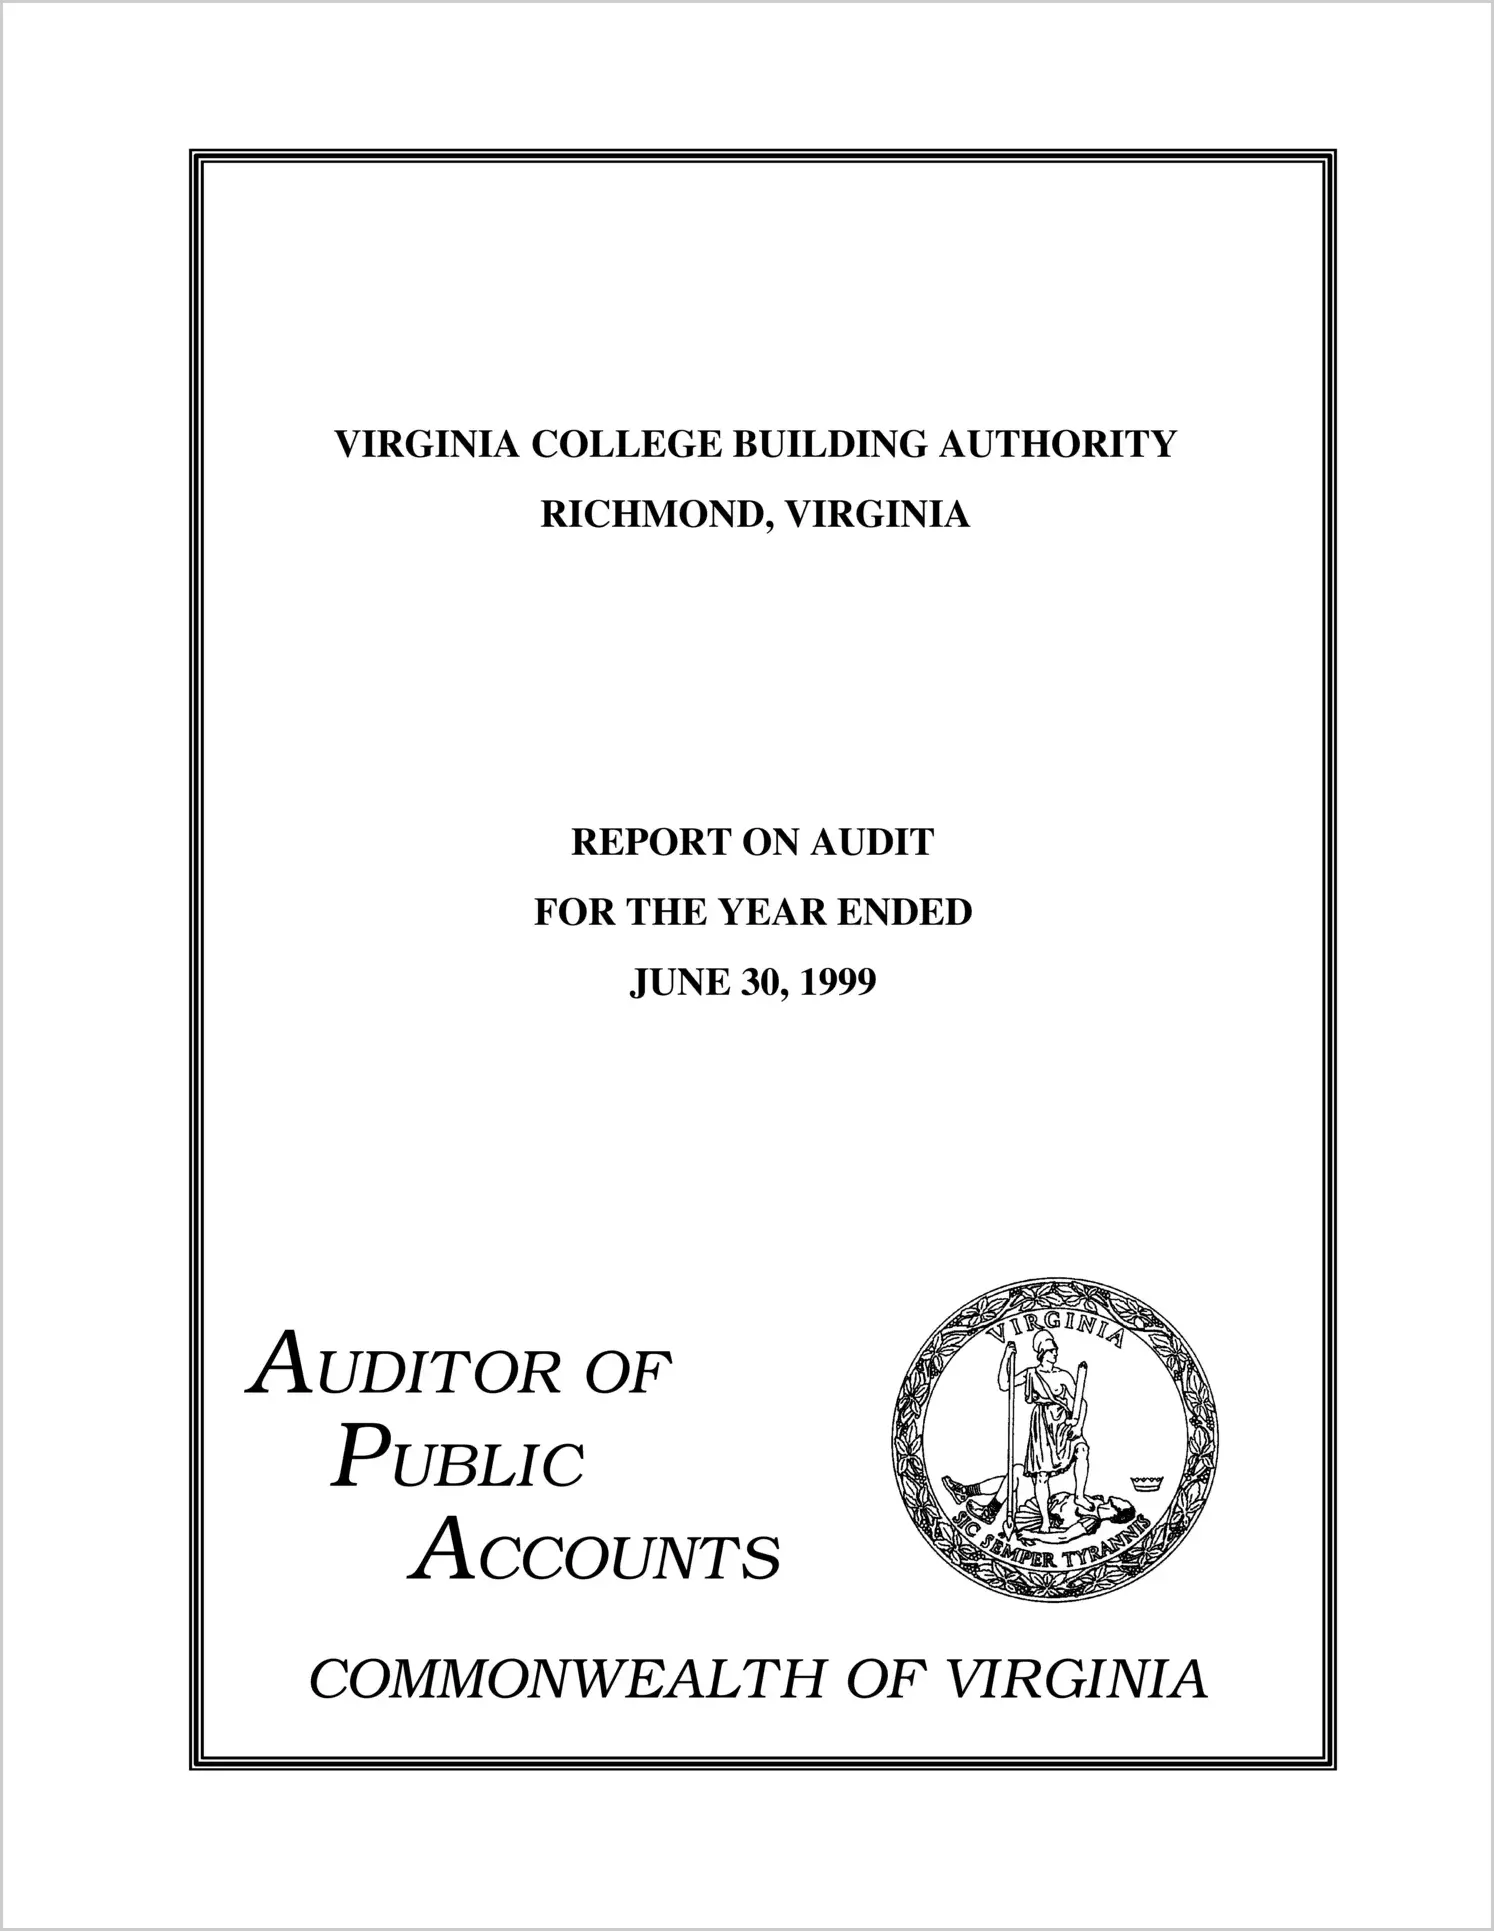 Virginia College Building Authority for the year ended June 30, 1999